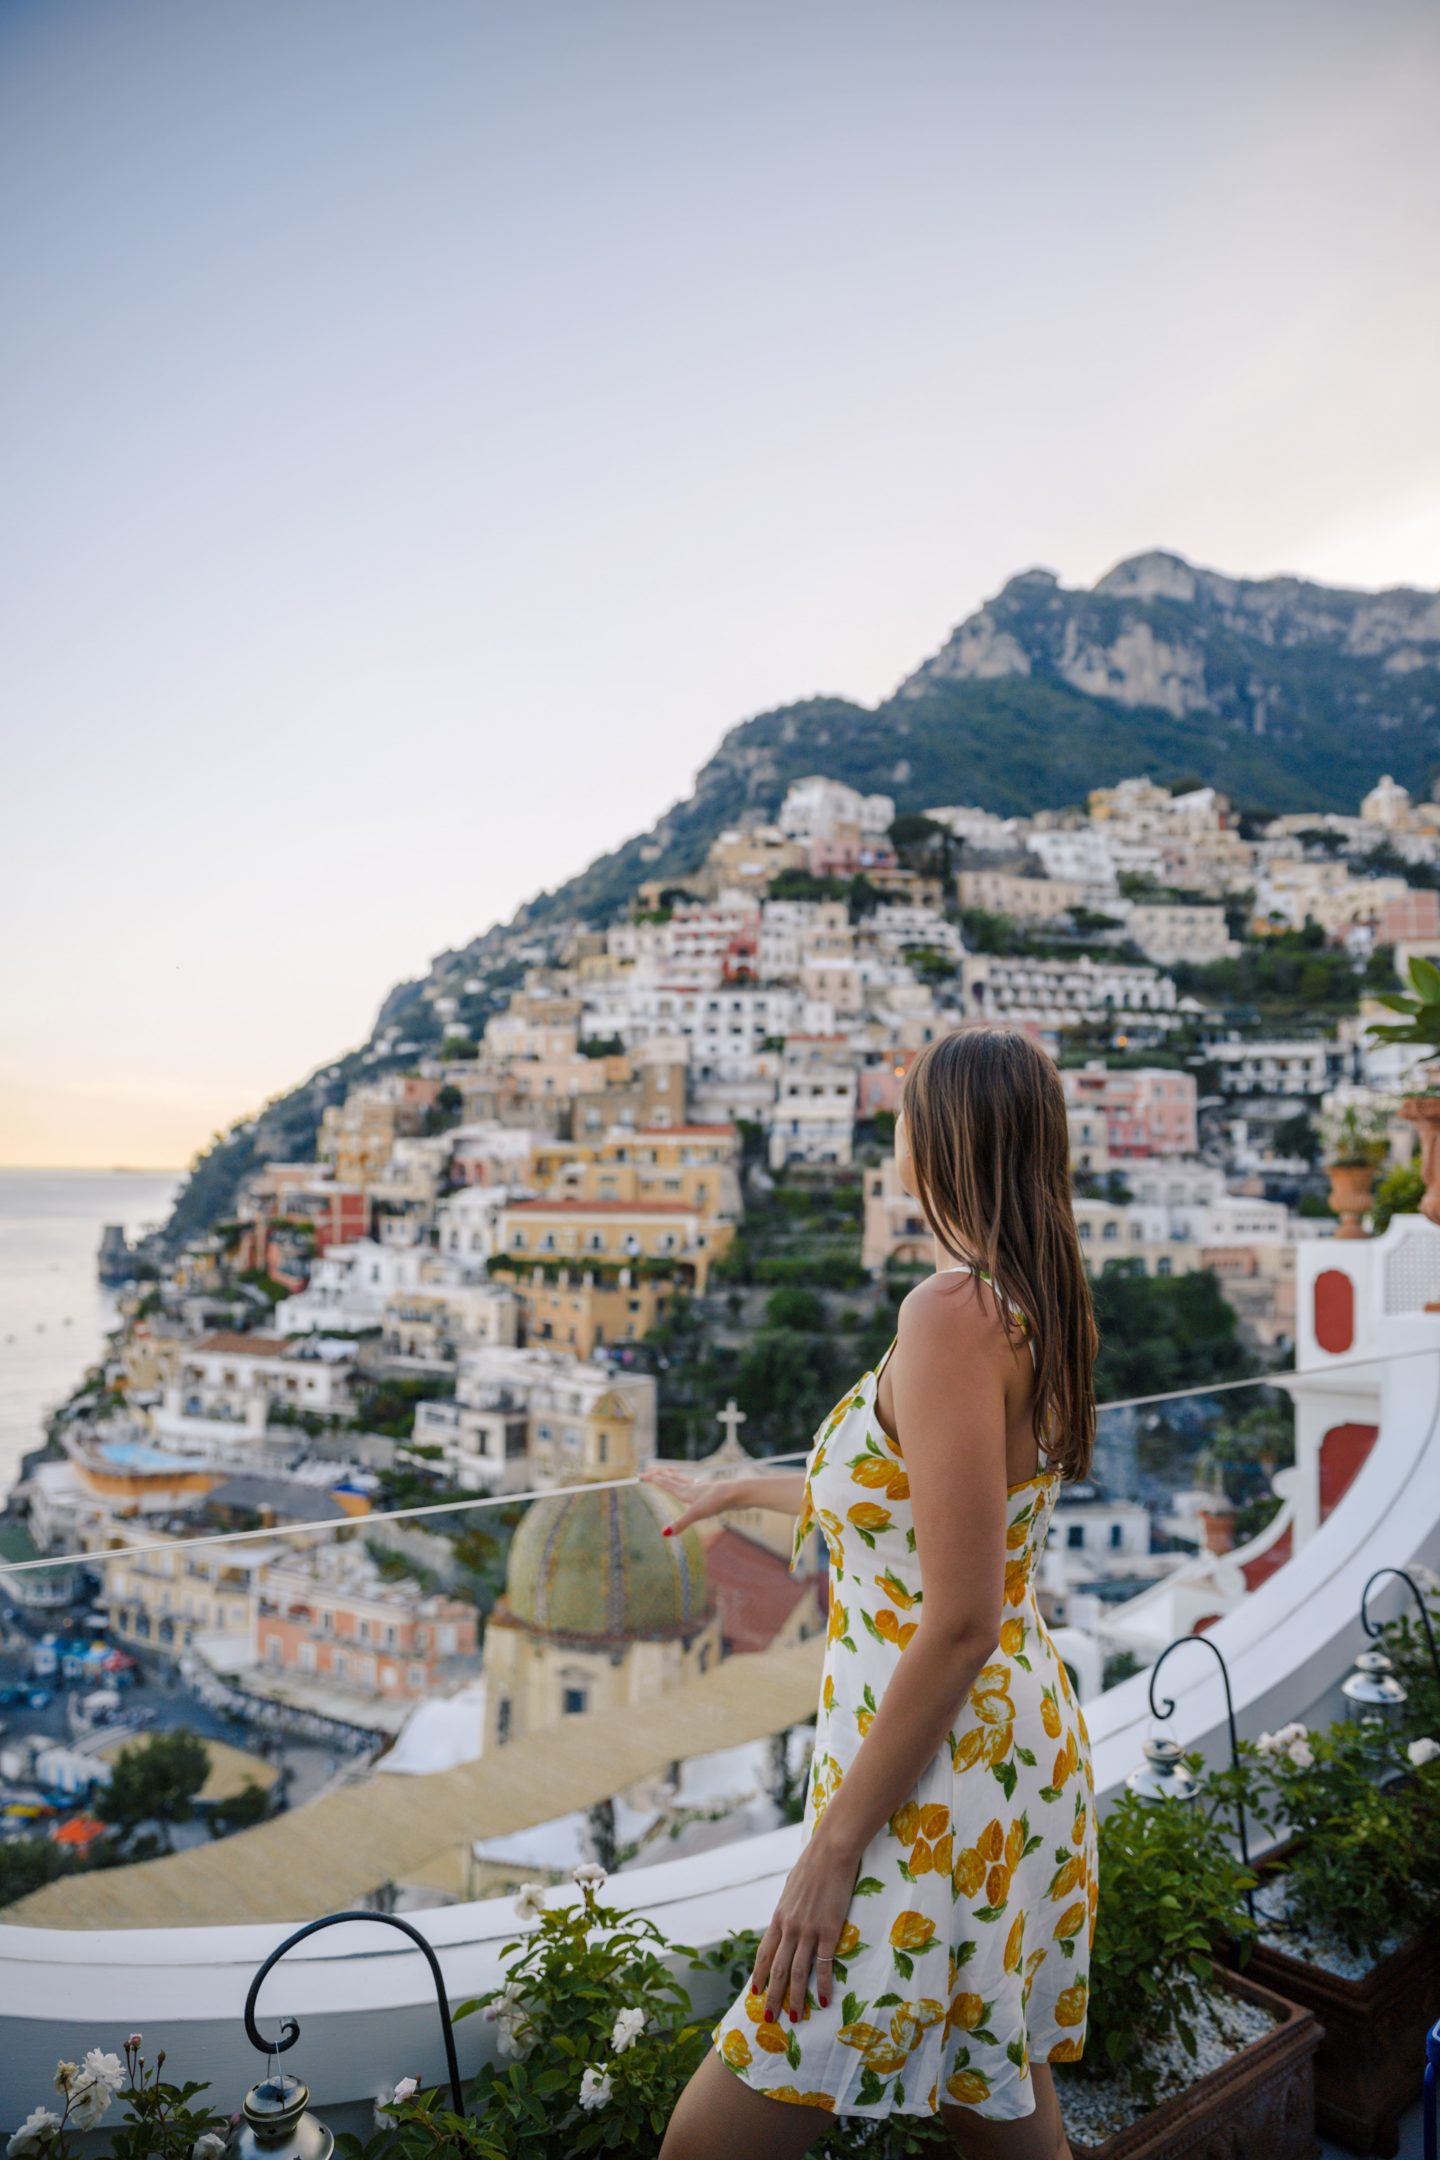 The Best Positano Instagram Shots | 12 Beautiful Shots You Can't Miss: Franco's Bar Le Sirenuse